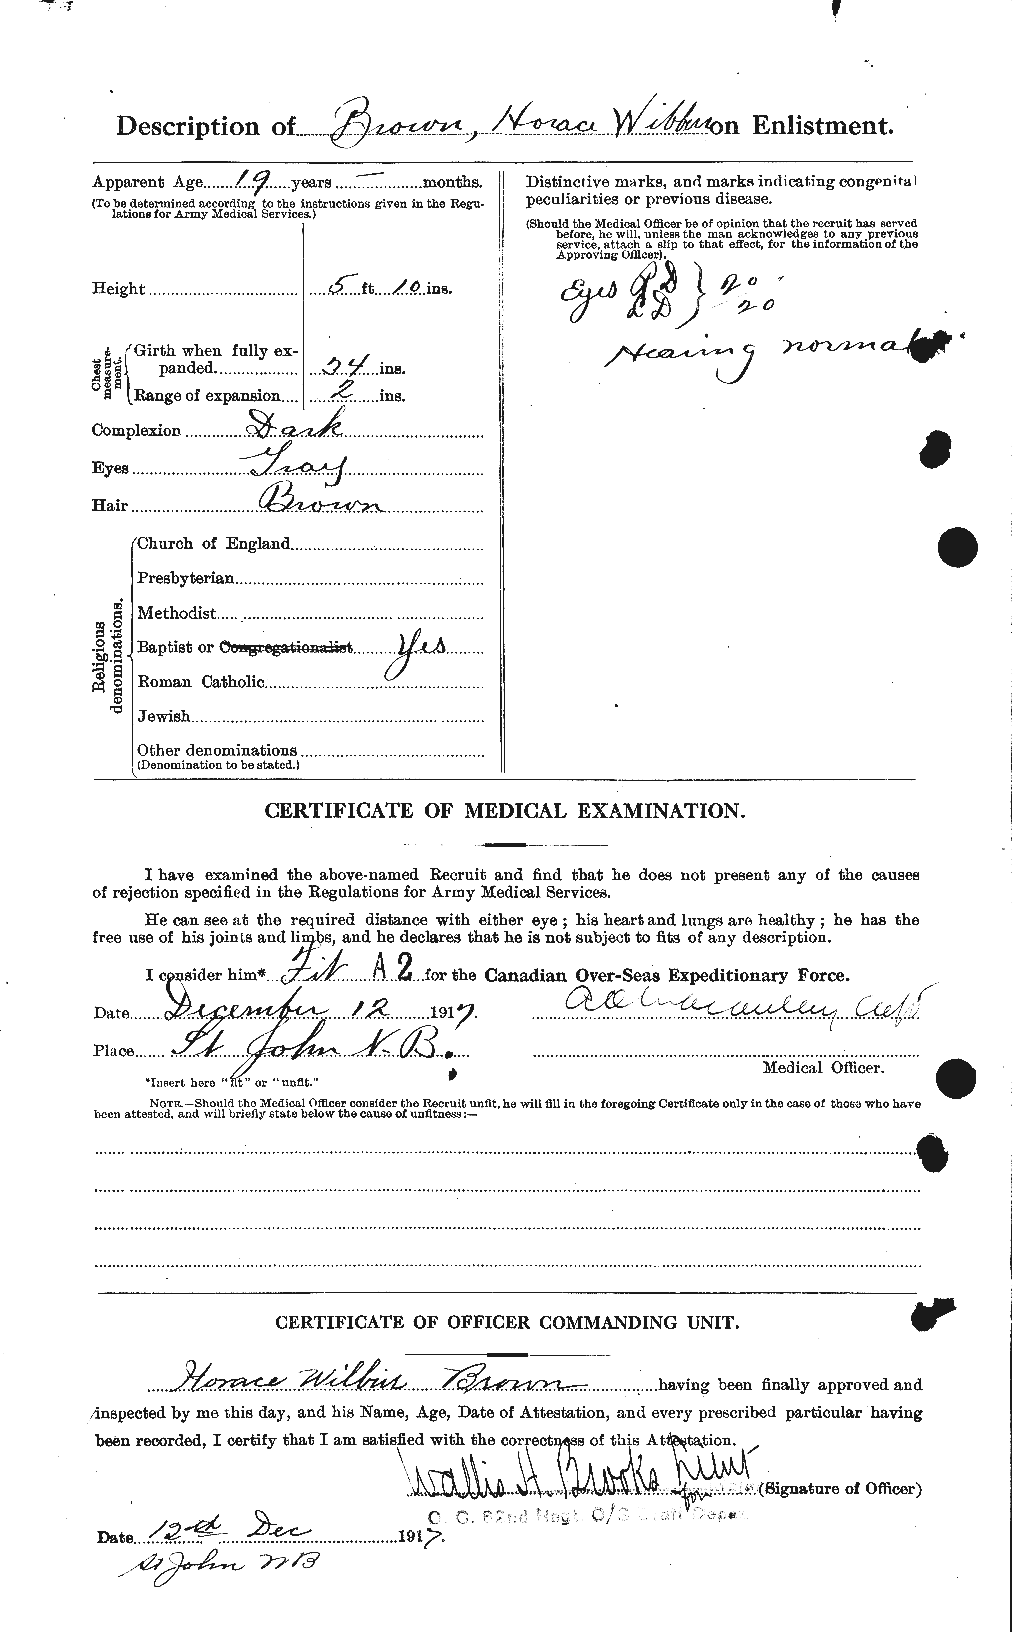 Personnel Records of the First World War - CEF 265610b